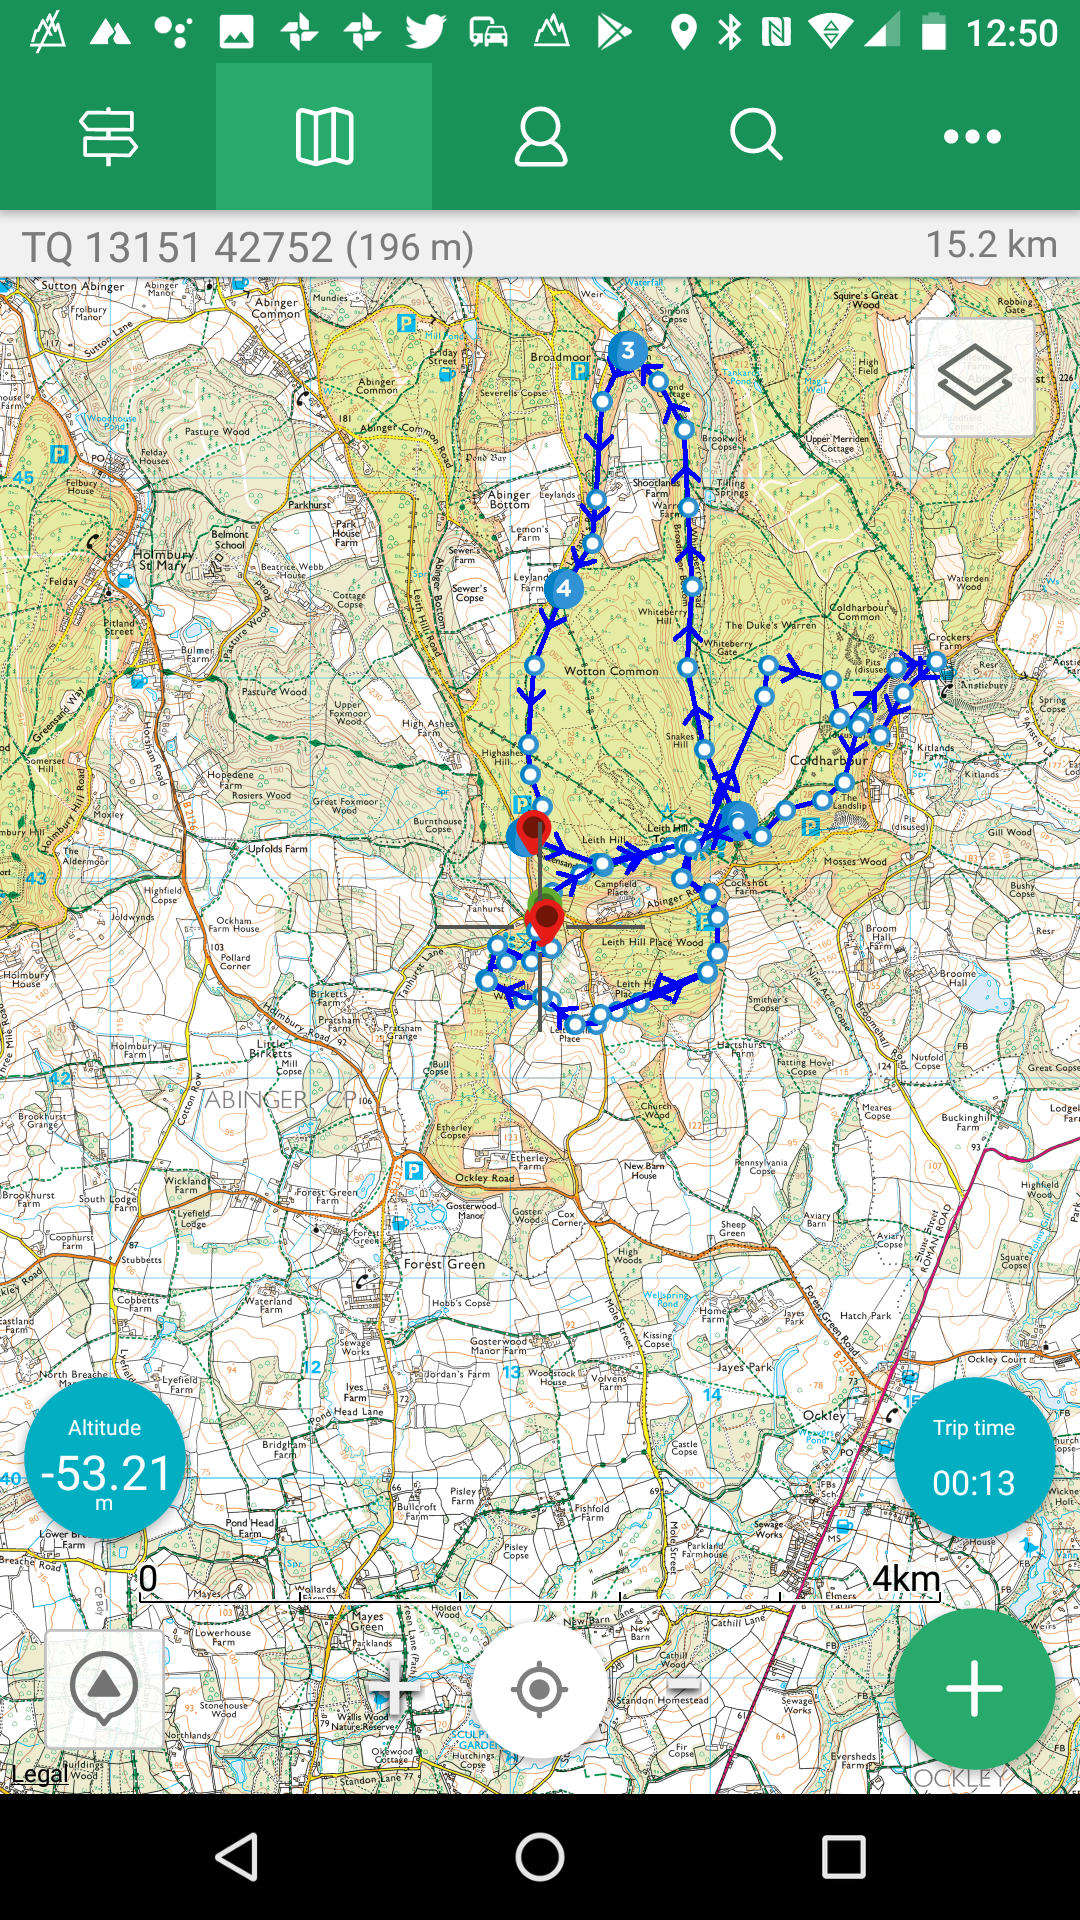 land rover route planner app